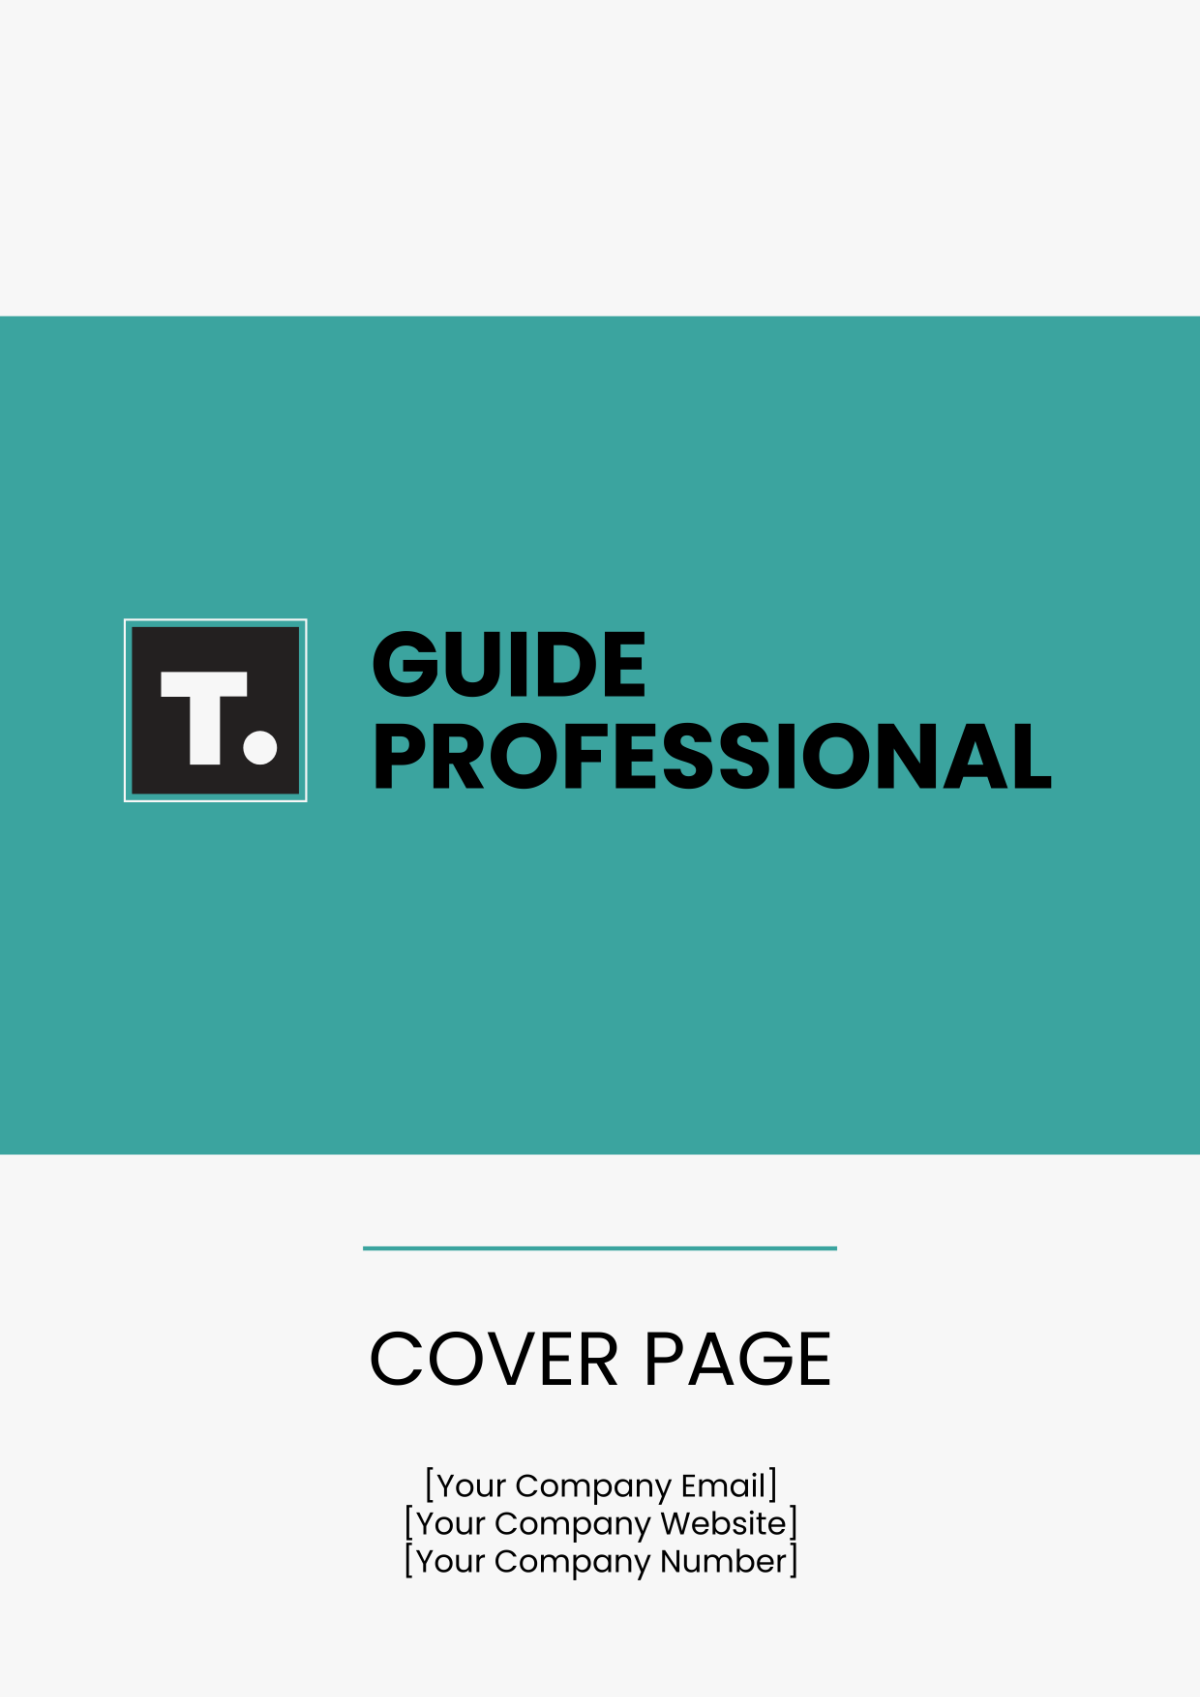 Guide Professional Cover Page